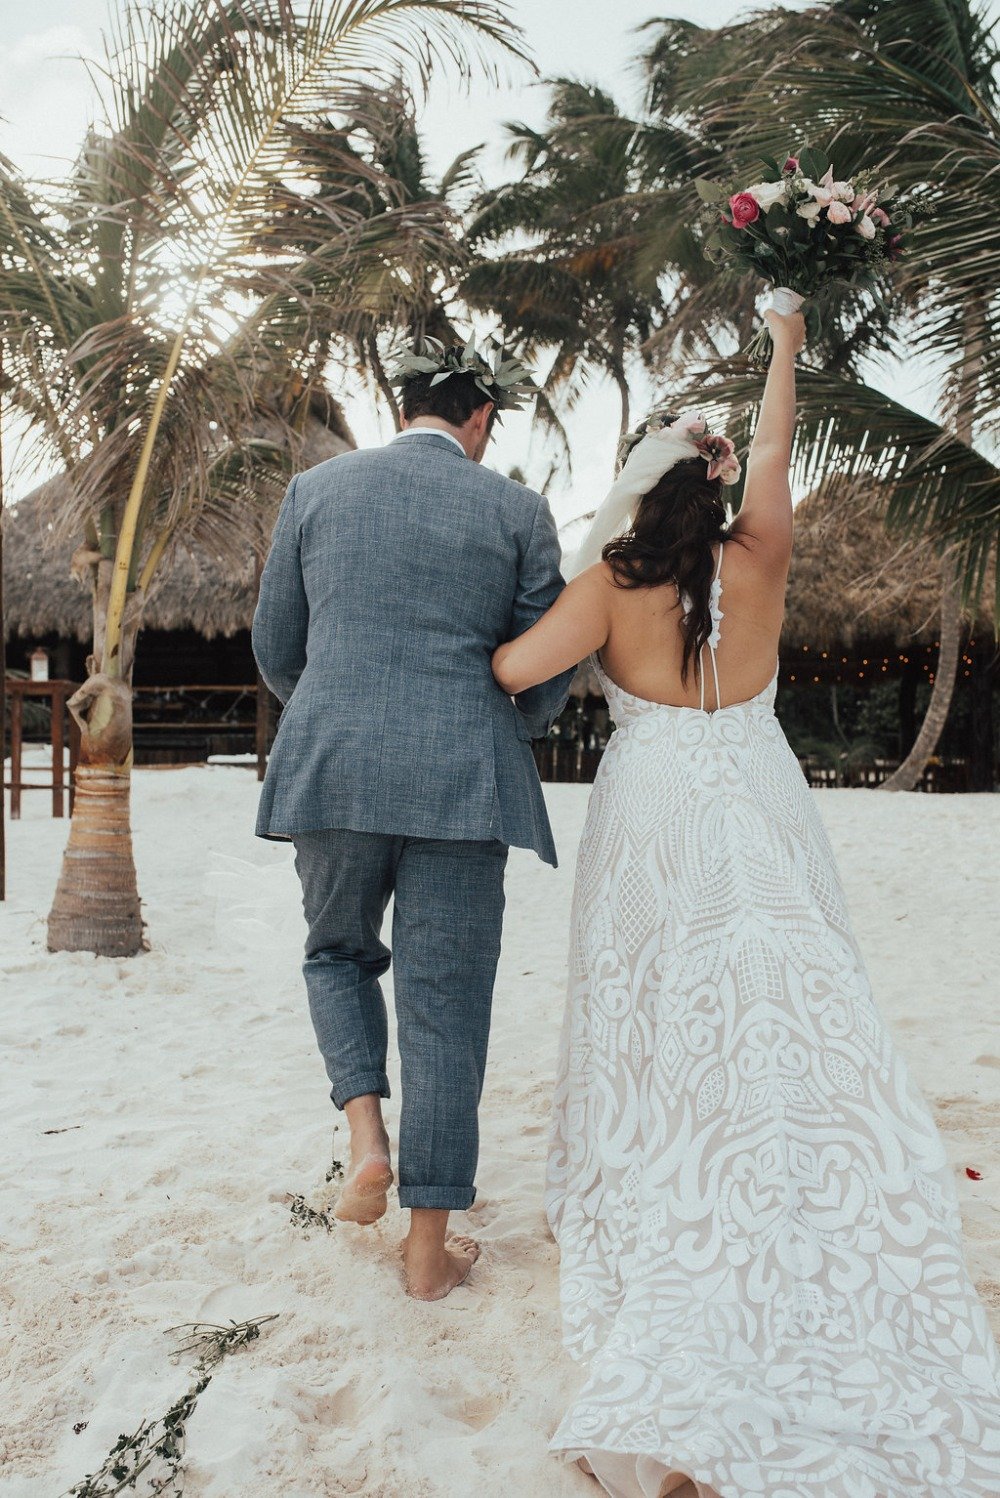 How To Have A Traditional Mayan Wedding